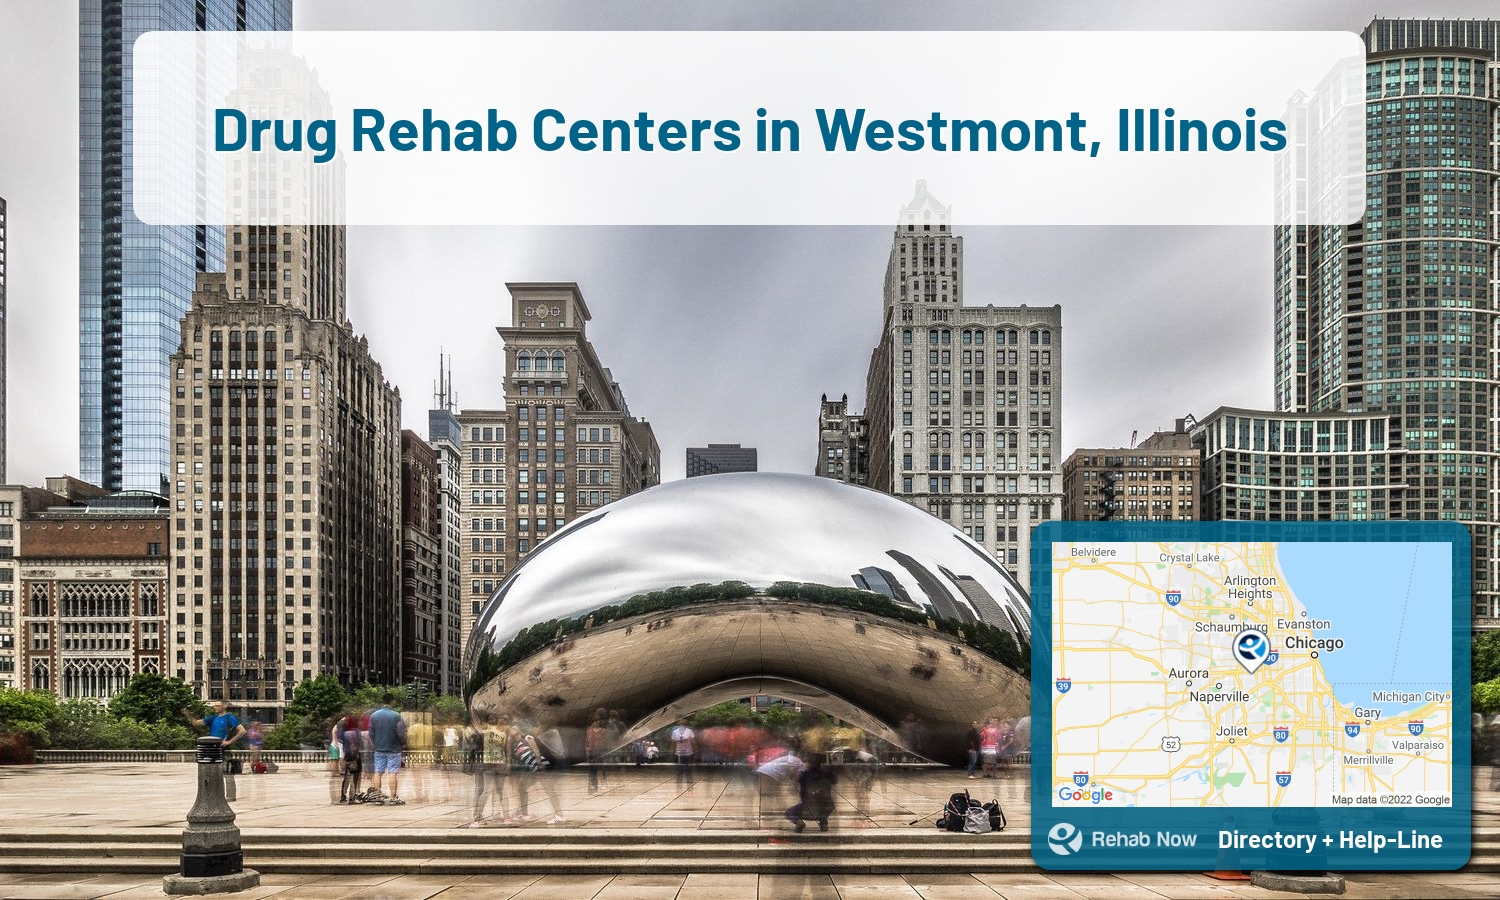 Find drug rehab and alcohol treatment services in Westmont. Our experts help you find a center in Westmont, Illinois